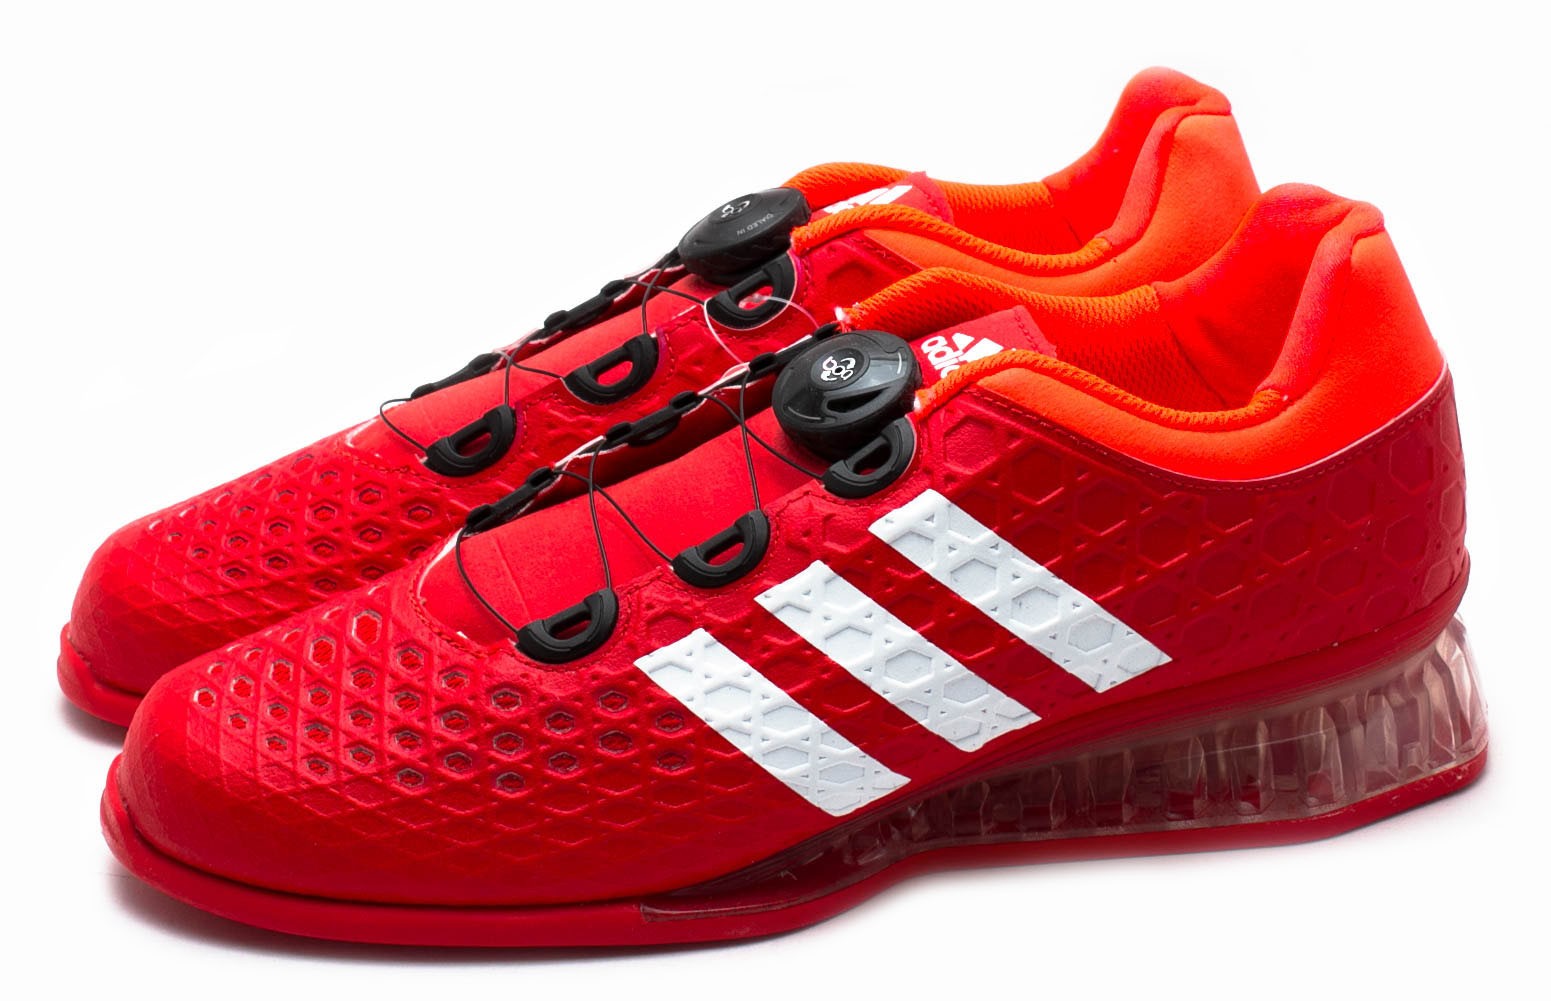 The best weightlifting shoes are the Adidas Leistung